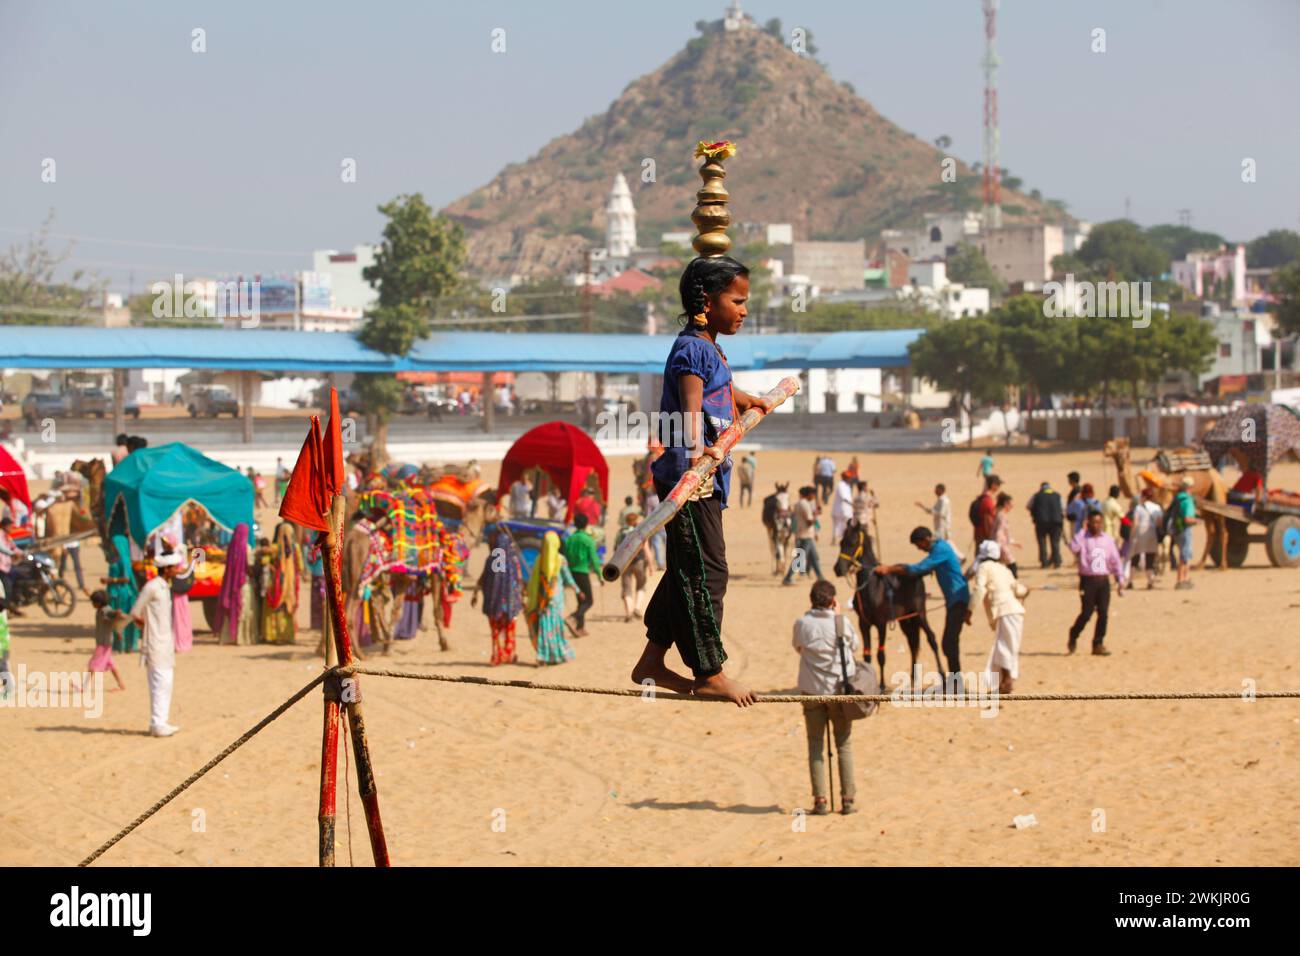 A young equilibrist tightrope walker at the Pushkar Camel Fair, Rajasthan, India. Stock Photo